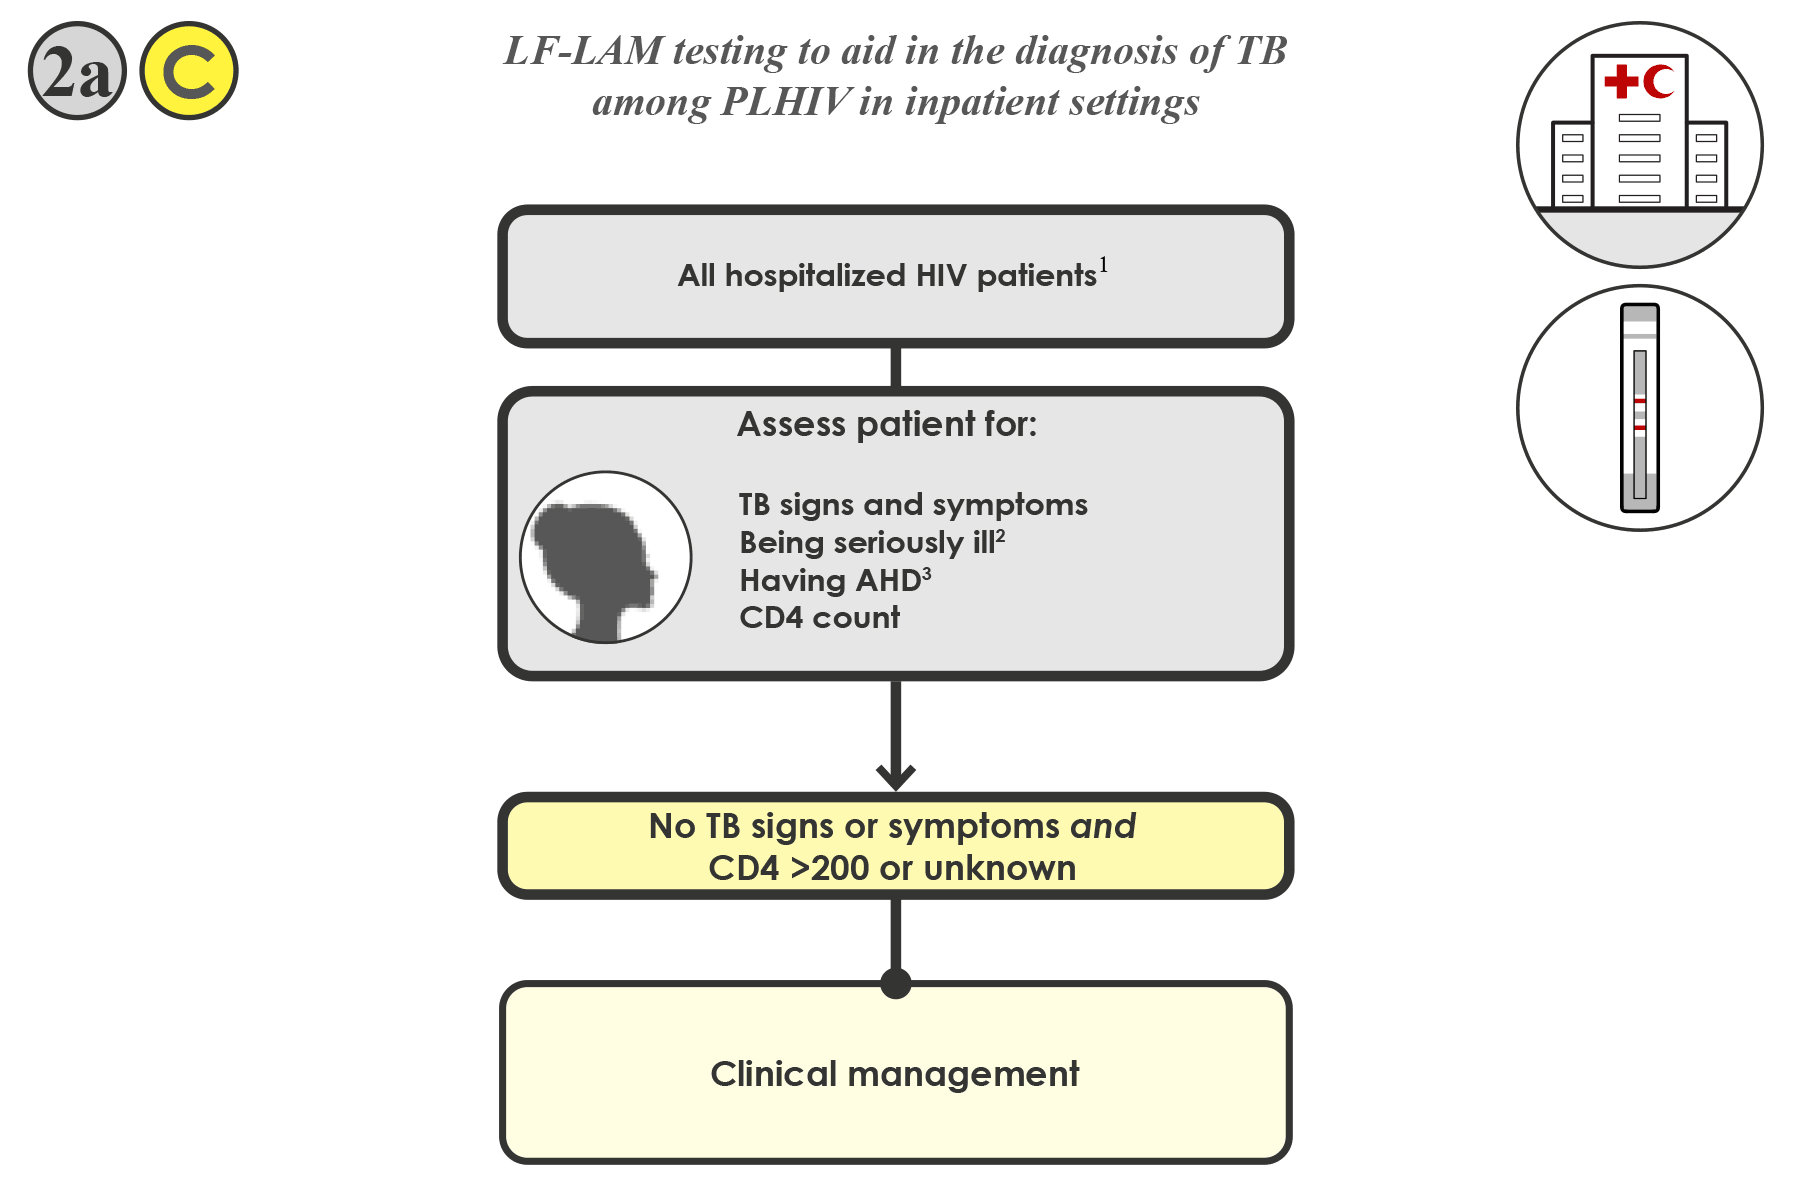 LF-LAM testing to aid in the diagnosis of TB